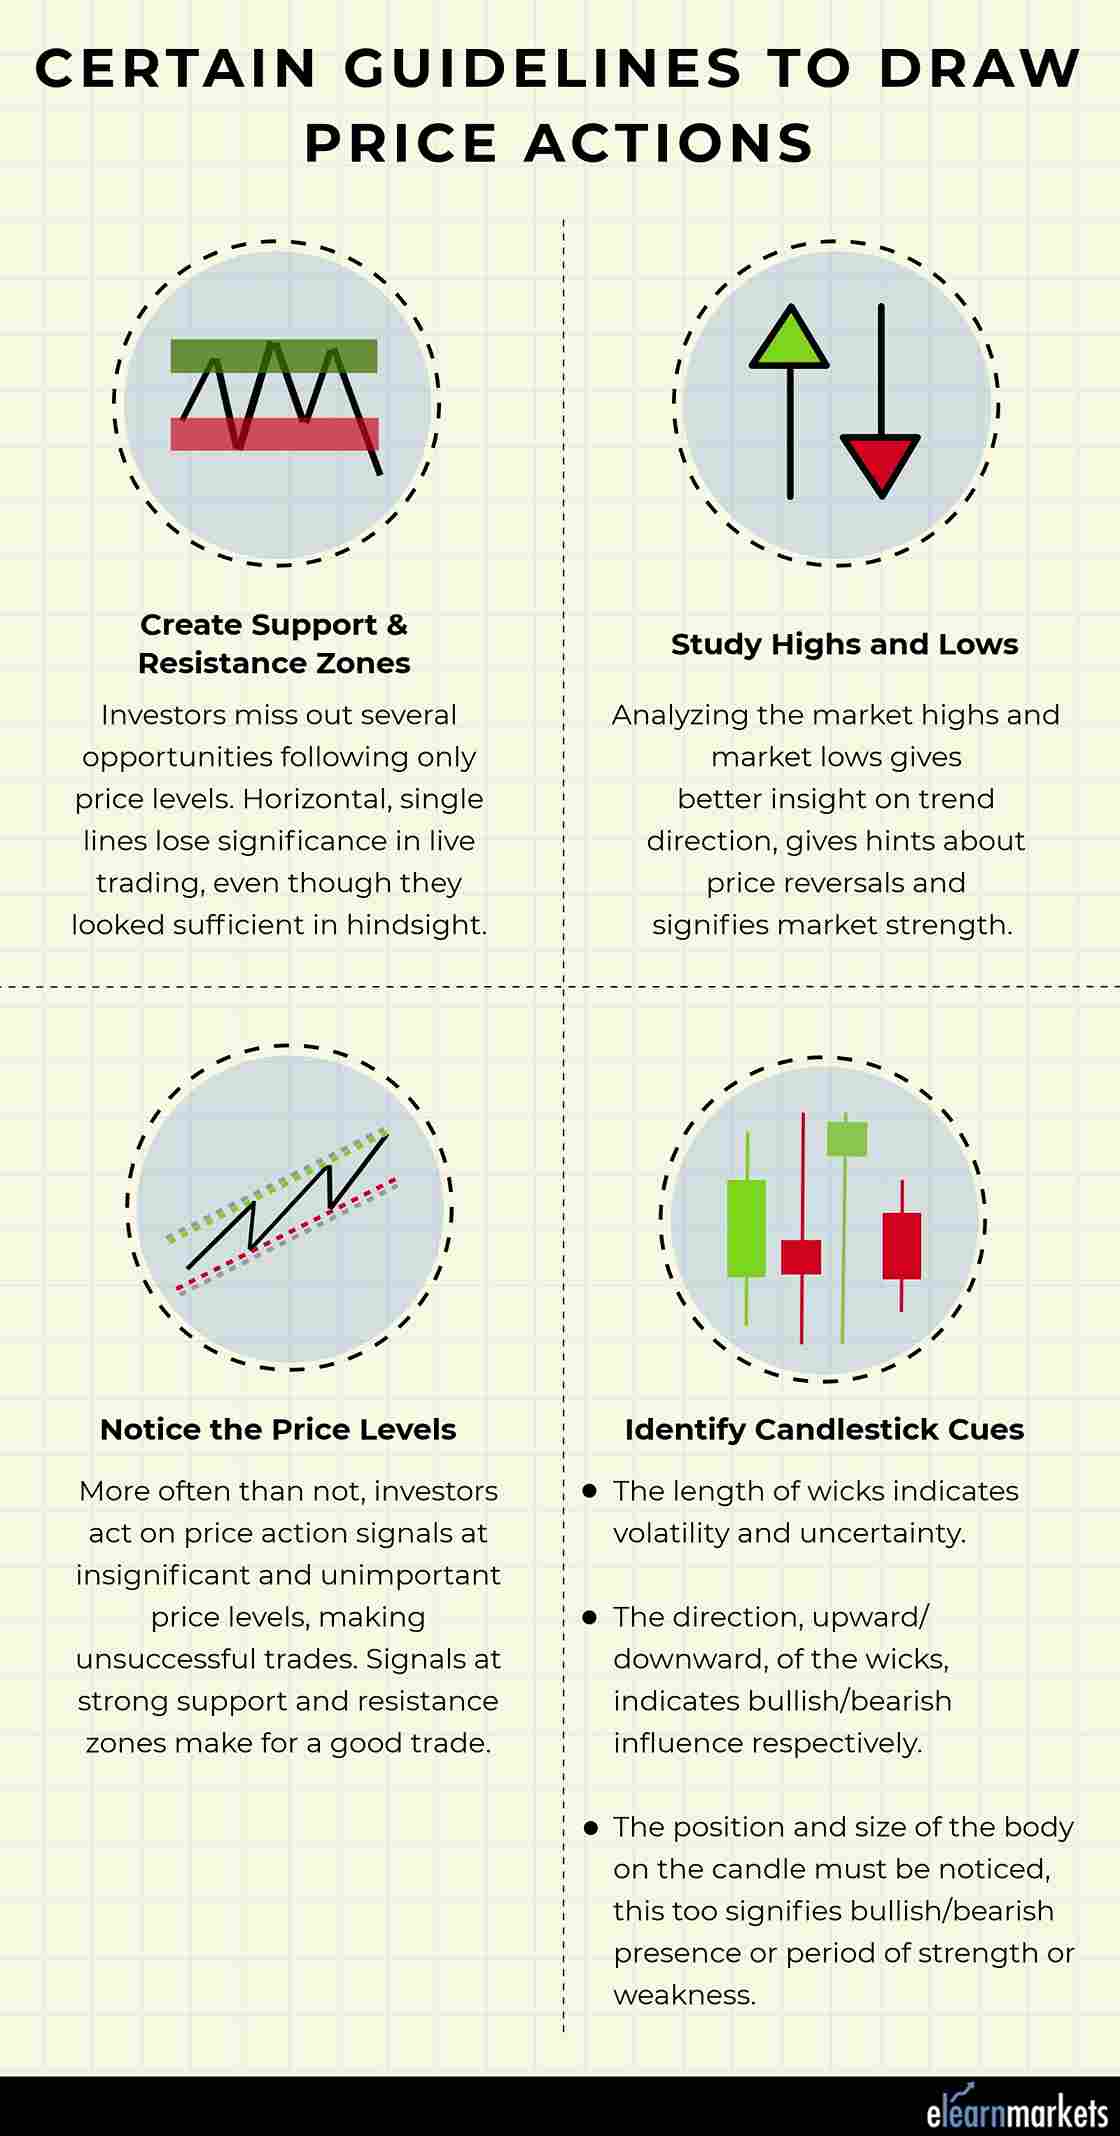  Certain Guidelines to draw Price Actions